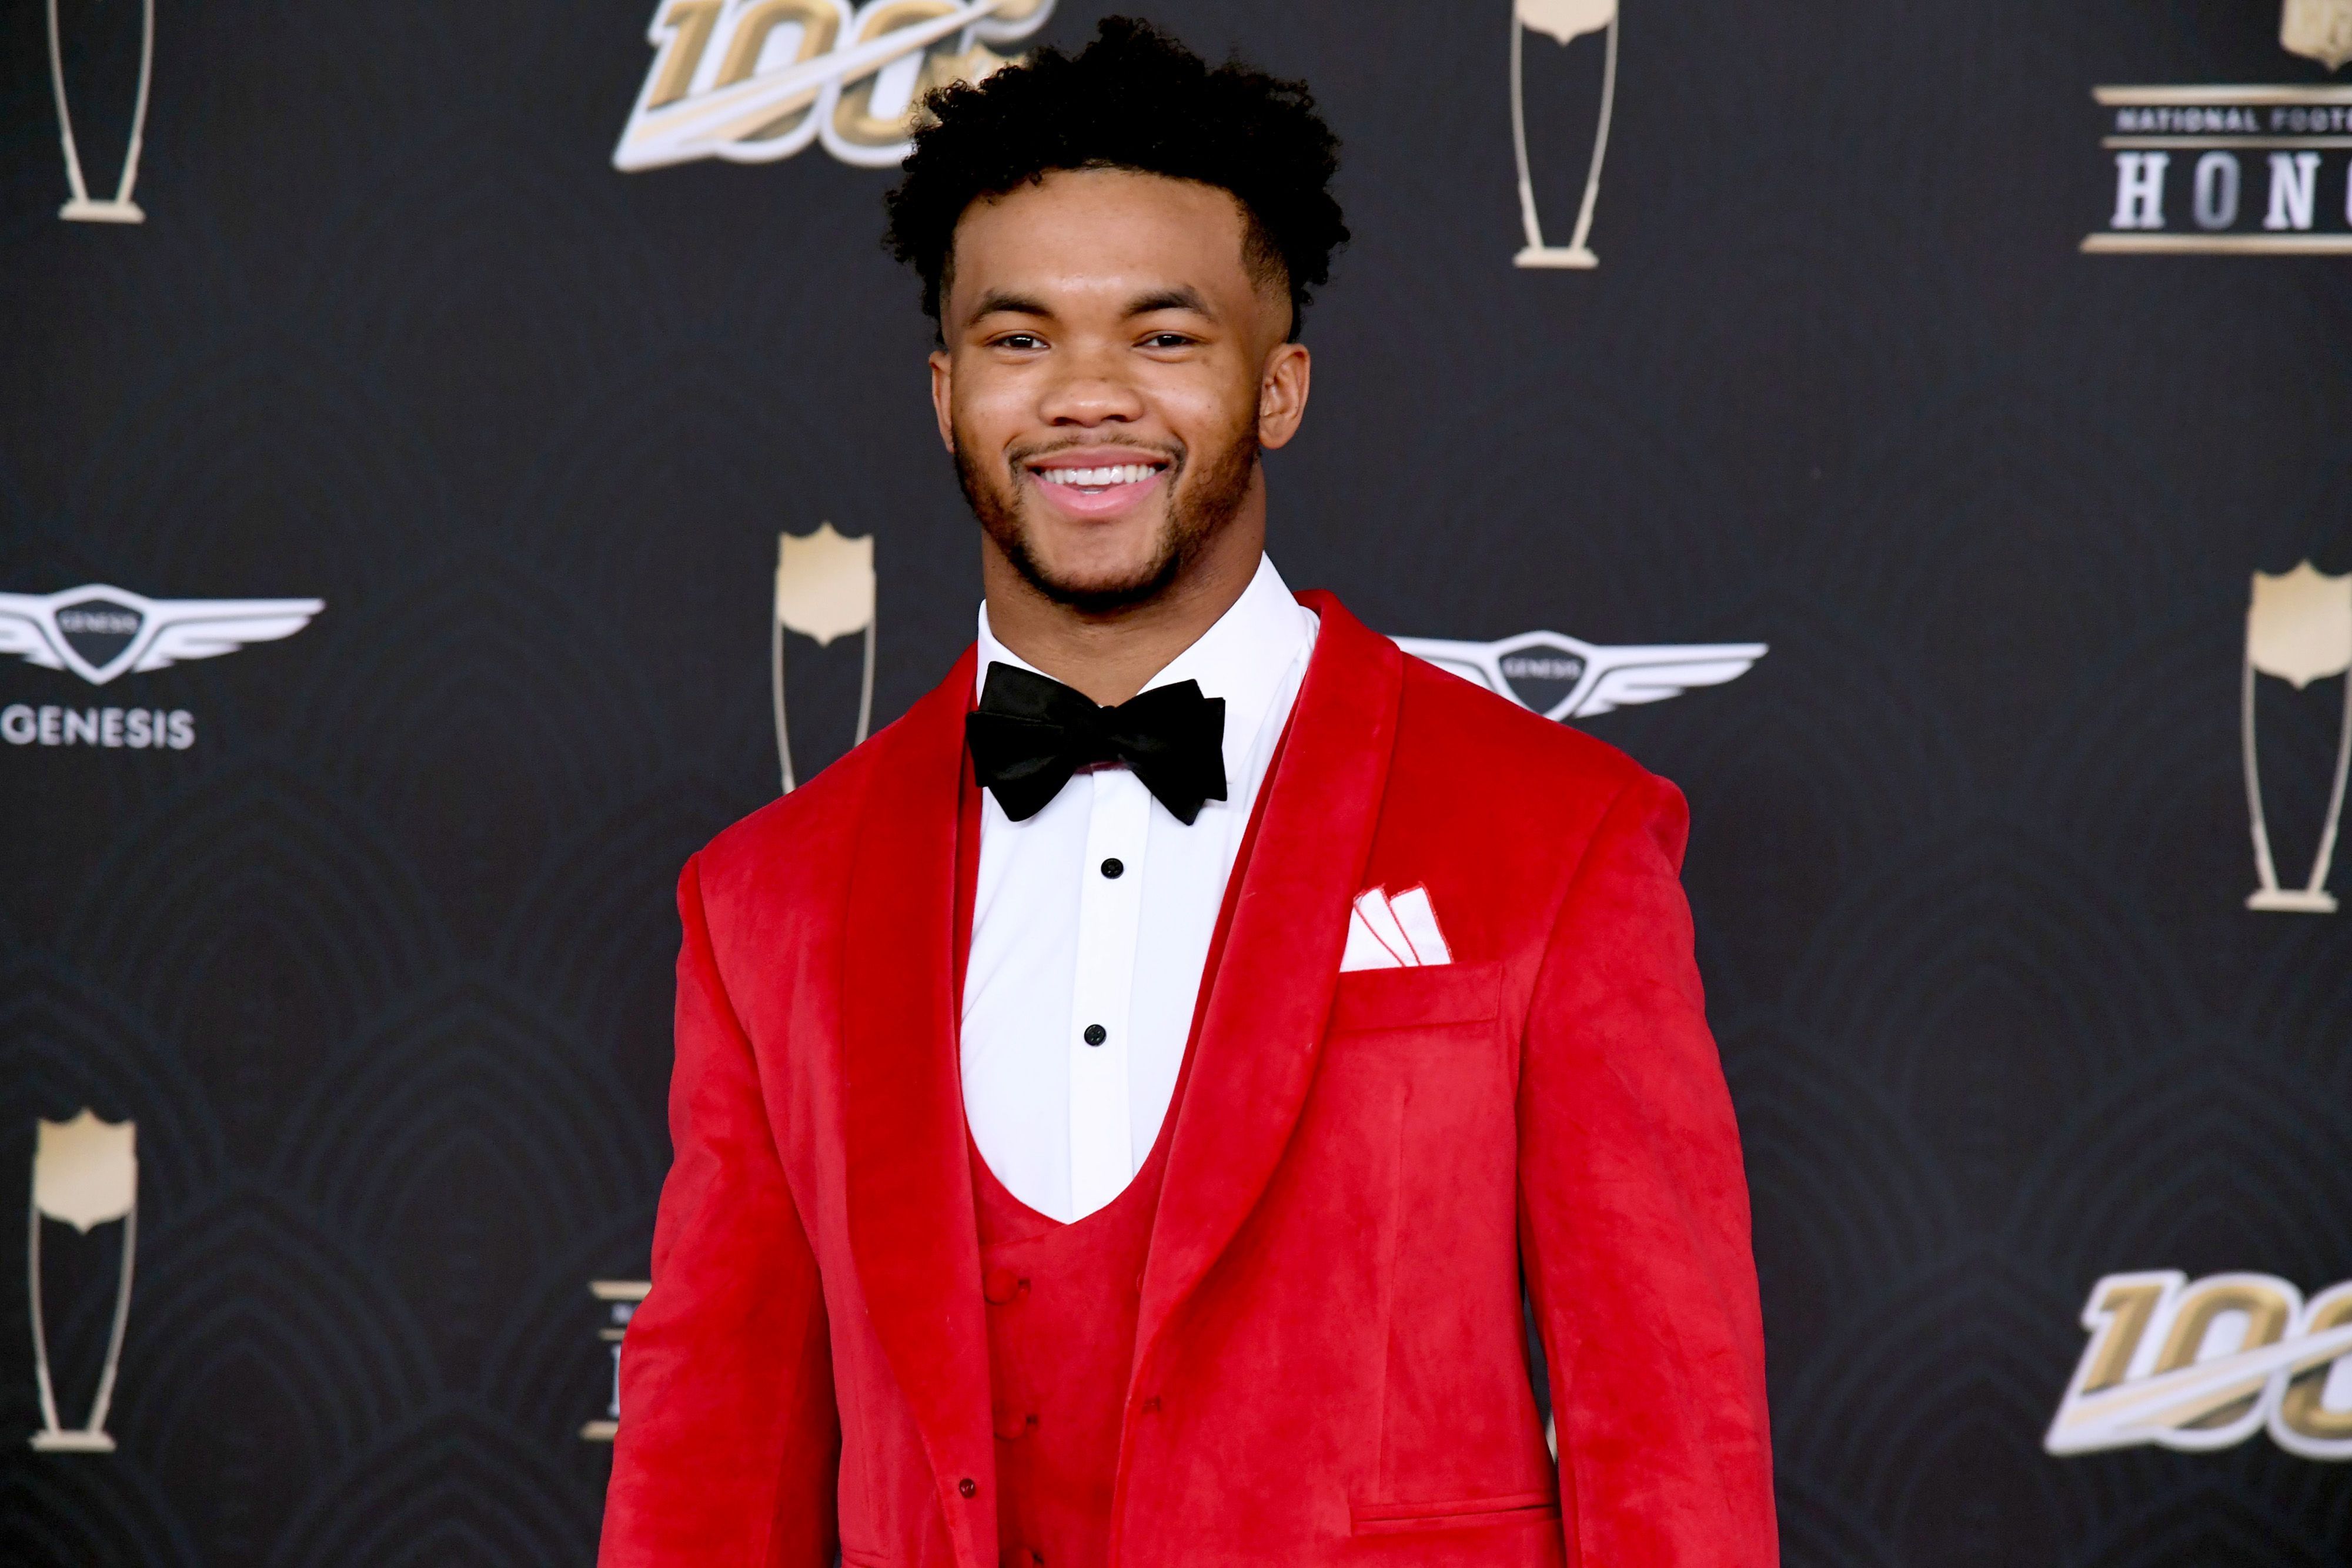 Kyler Murray attends the 9th Annual NFL Honors at Adrienne Arsht Center on February 01, 2020. Kyler Murray's girlfriend may have been at the event as his guest